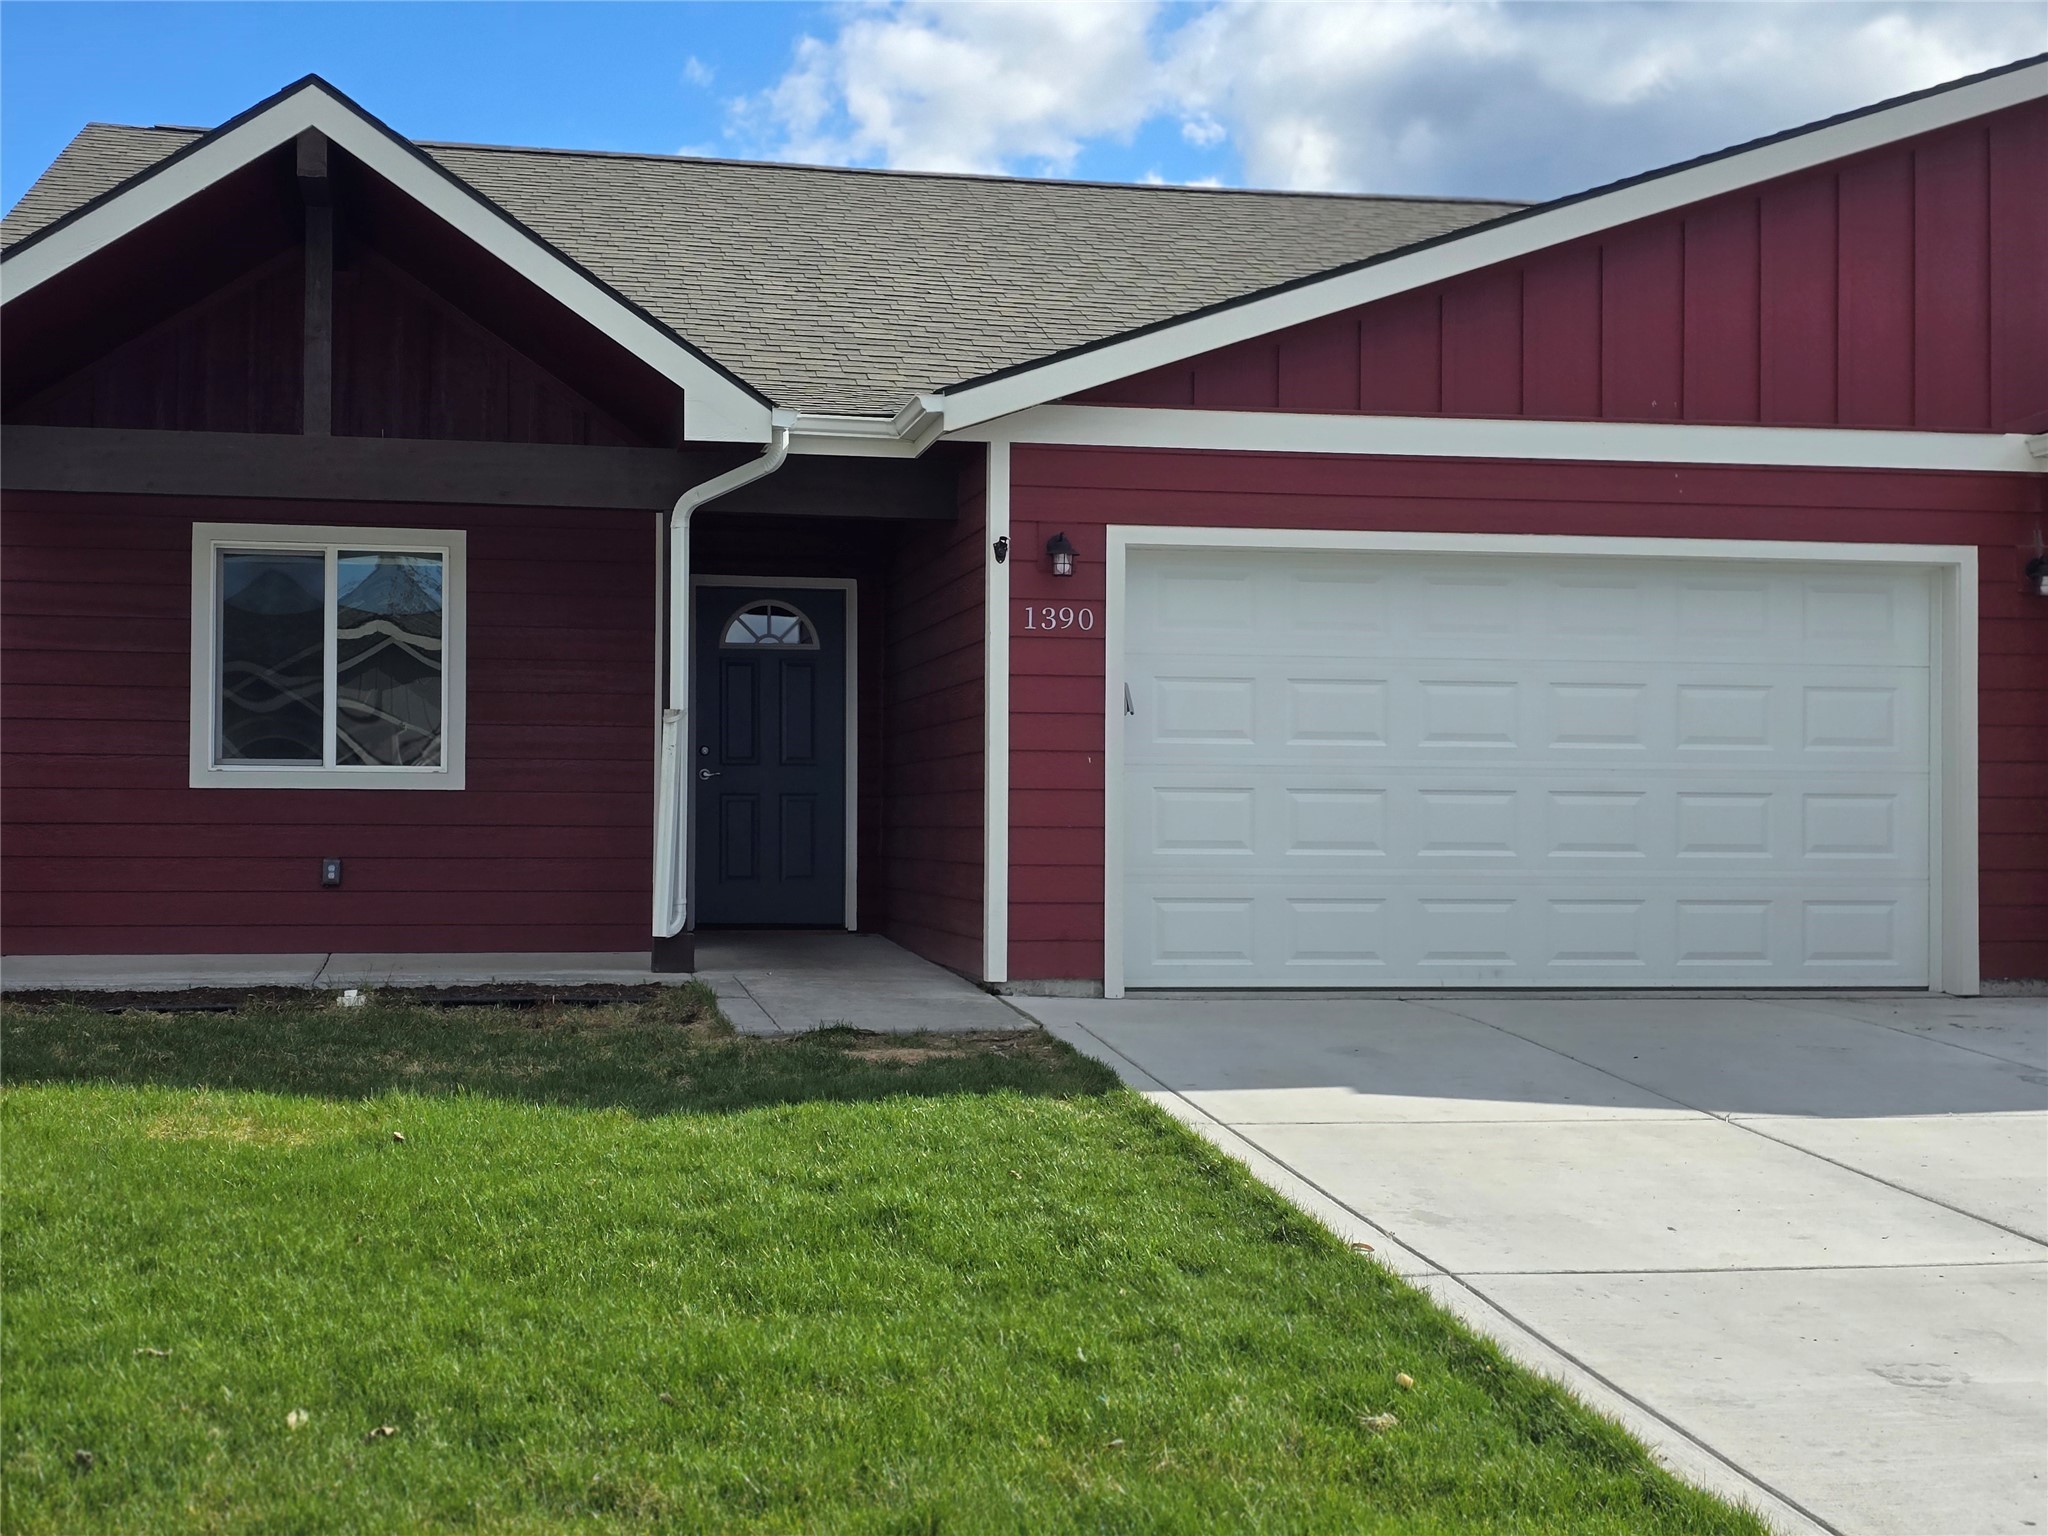 Newer Townhouse close to downtown Kalispell.  This single level 3 bed 2 bath home with open floor plan is move in ready. Fully fenced backyard, front porch, back patio, irrigation and attached garage. Close to Radkin Elementary School and the access to the bypass. Call Jessica Bubar at 406-890-1531 or your real estate professional.